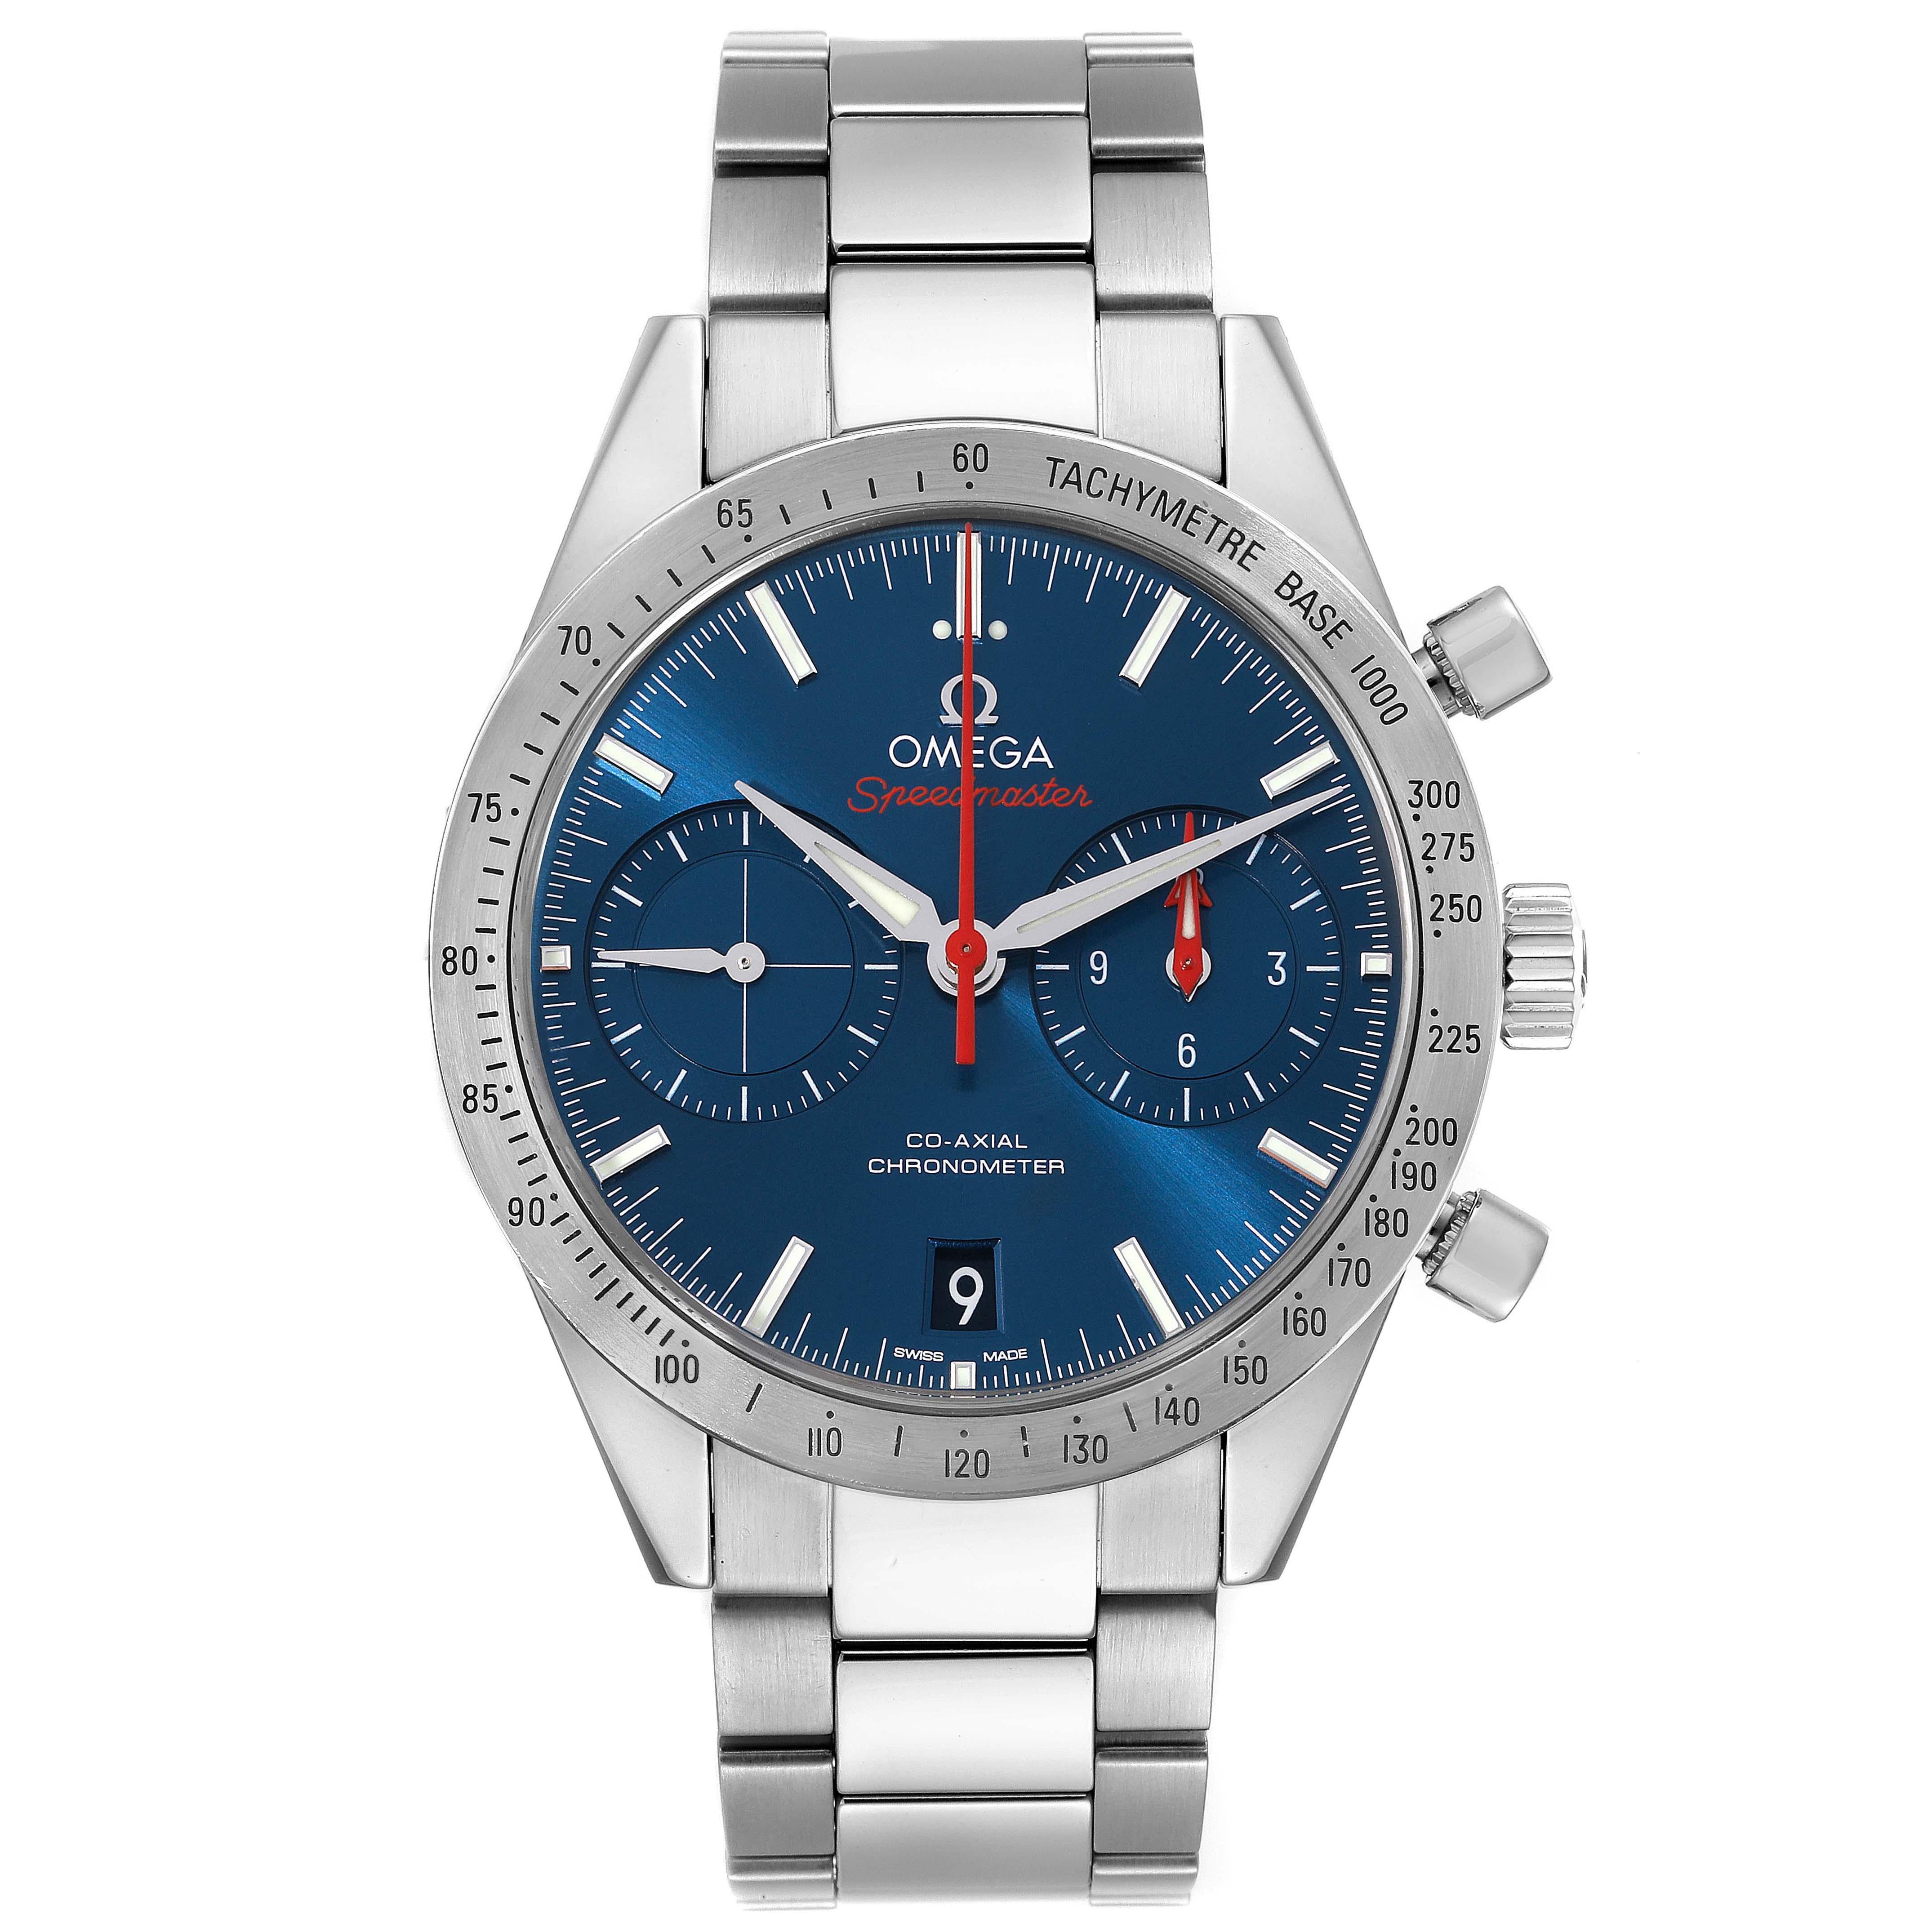 Omega Speedmaster 57 Co-Axial Chronograph Steel Mens Watch 331.10.42.51.03.001. Automatic self-winding chronograph movement with column wheel mechanism and Co-Axial Escapement. Silicon balance-spring on free sprung-balance, 2 barrels mounted in